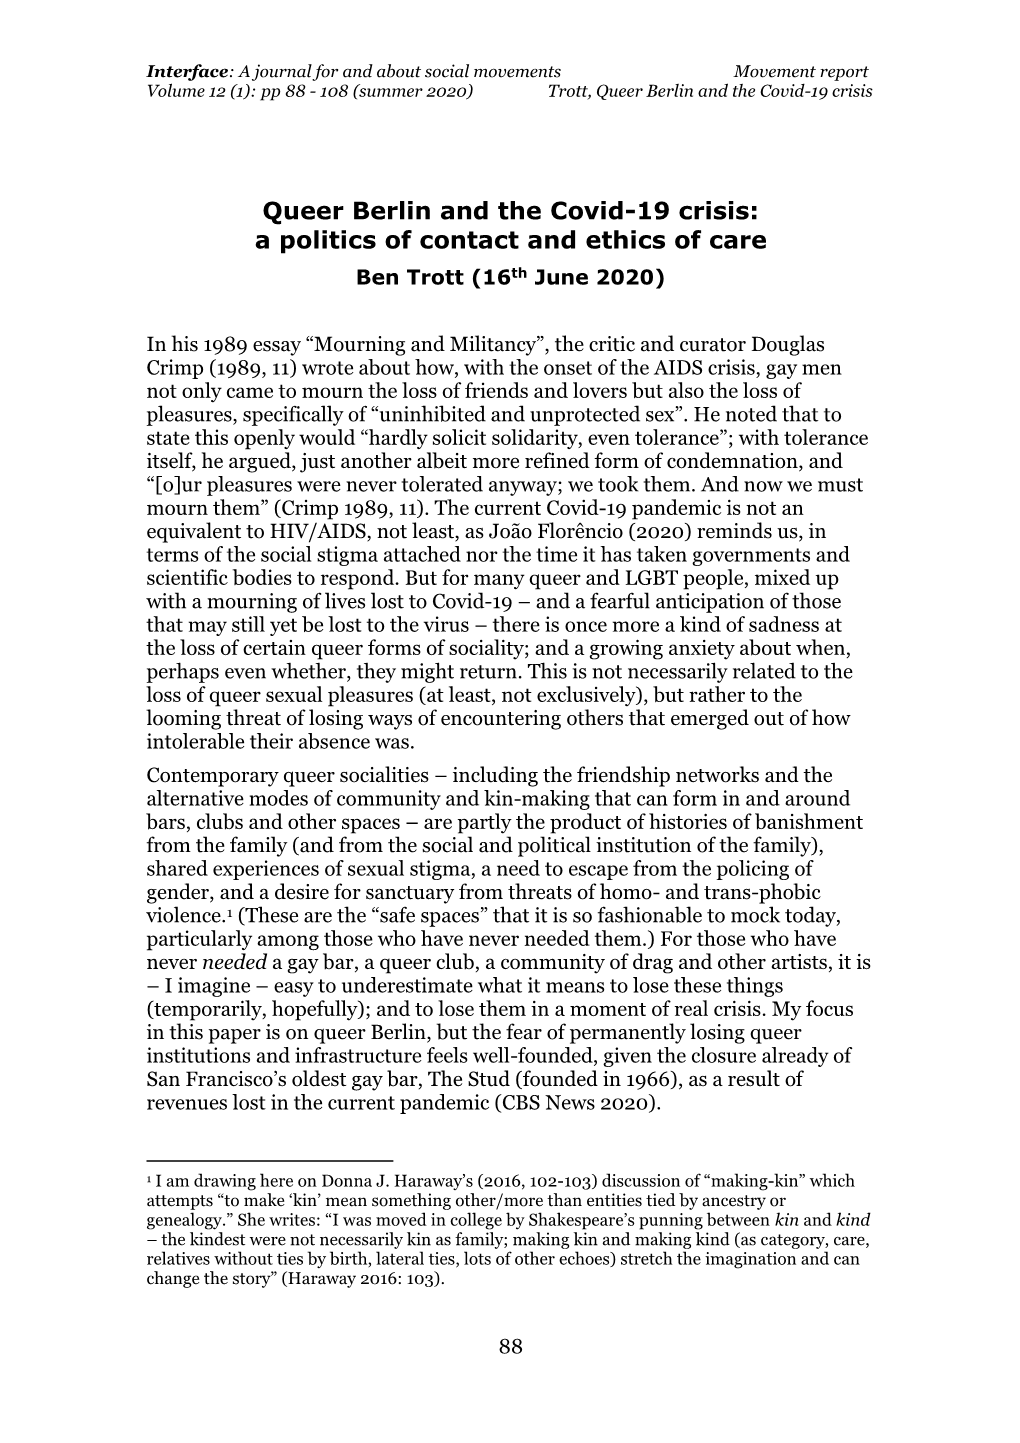 Queer Berlin and the Covid-19 Crisis: a Politics of Contact and Ethics of Care Ben Trott (16Th June 2020)